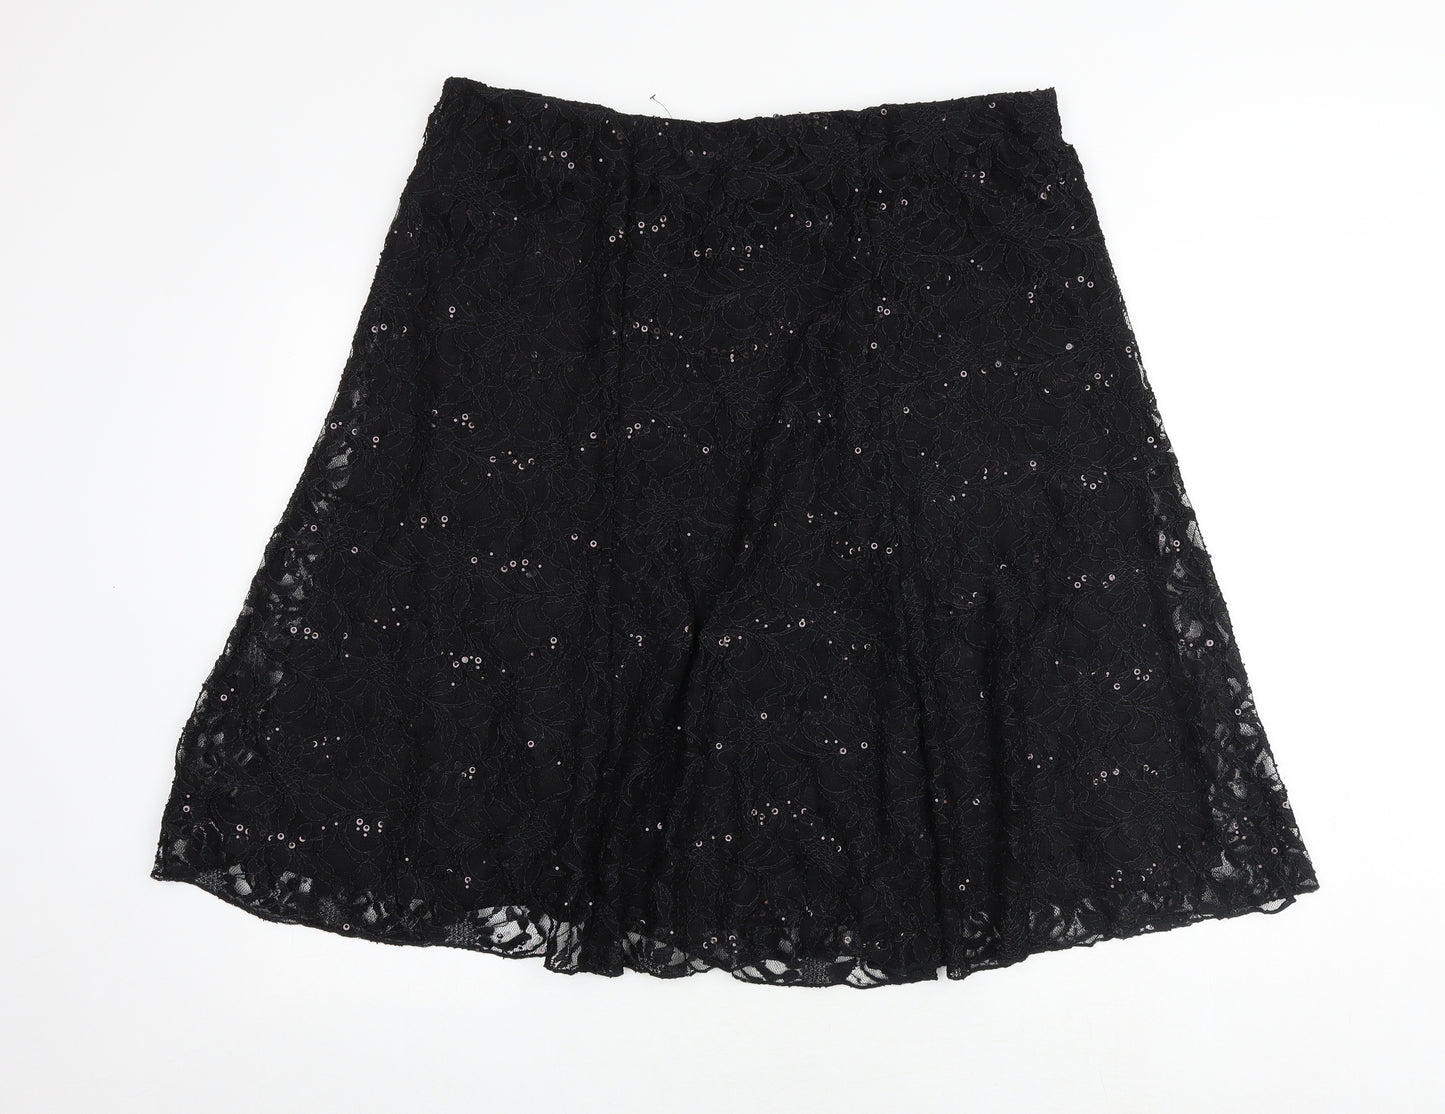 Bonmarché Womens Black Floral Polyester Swing Skirt Size 20